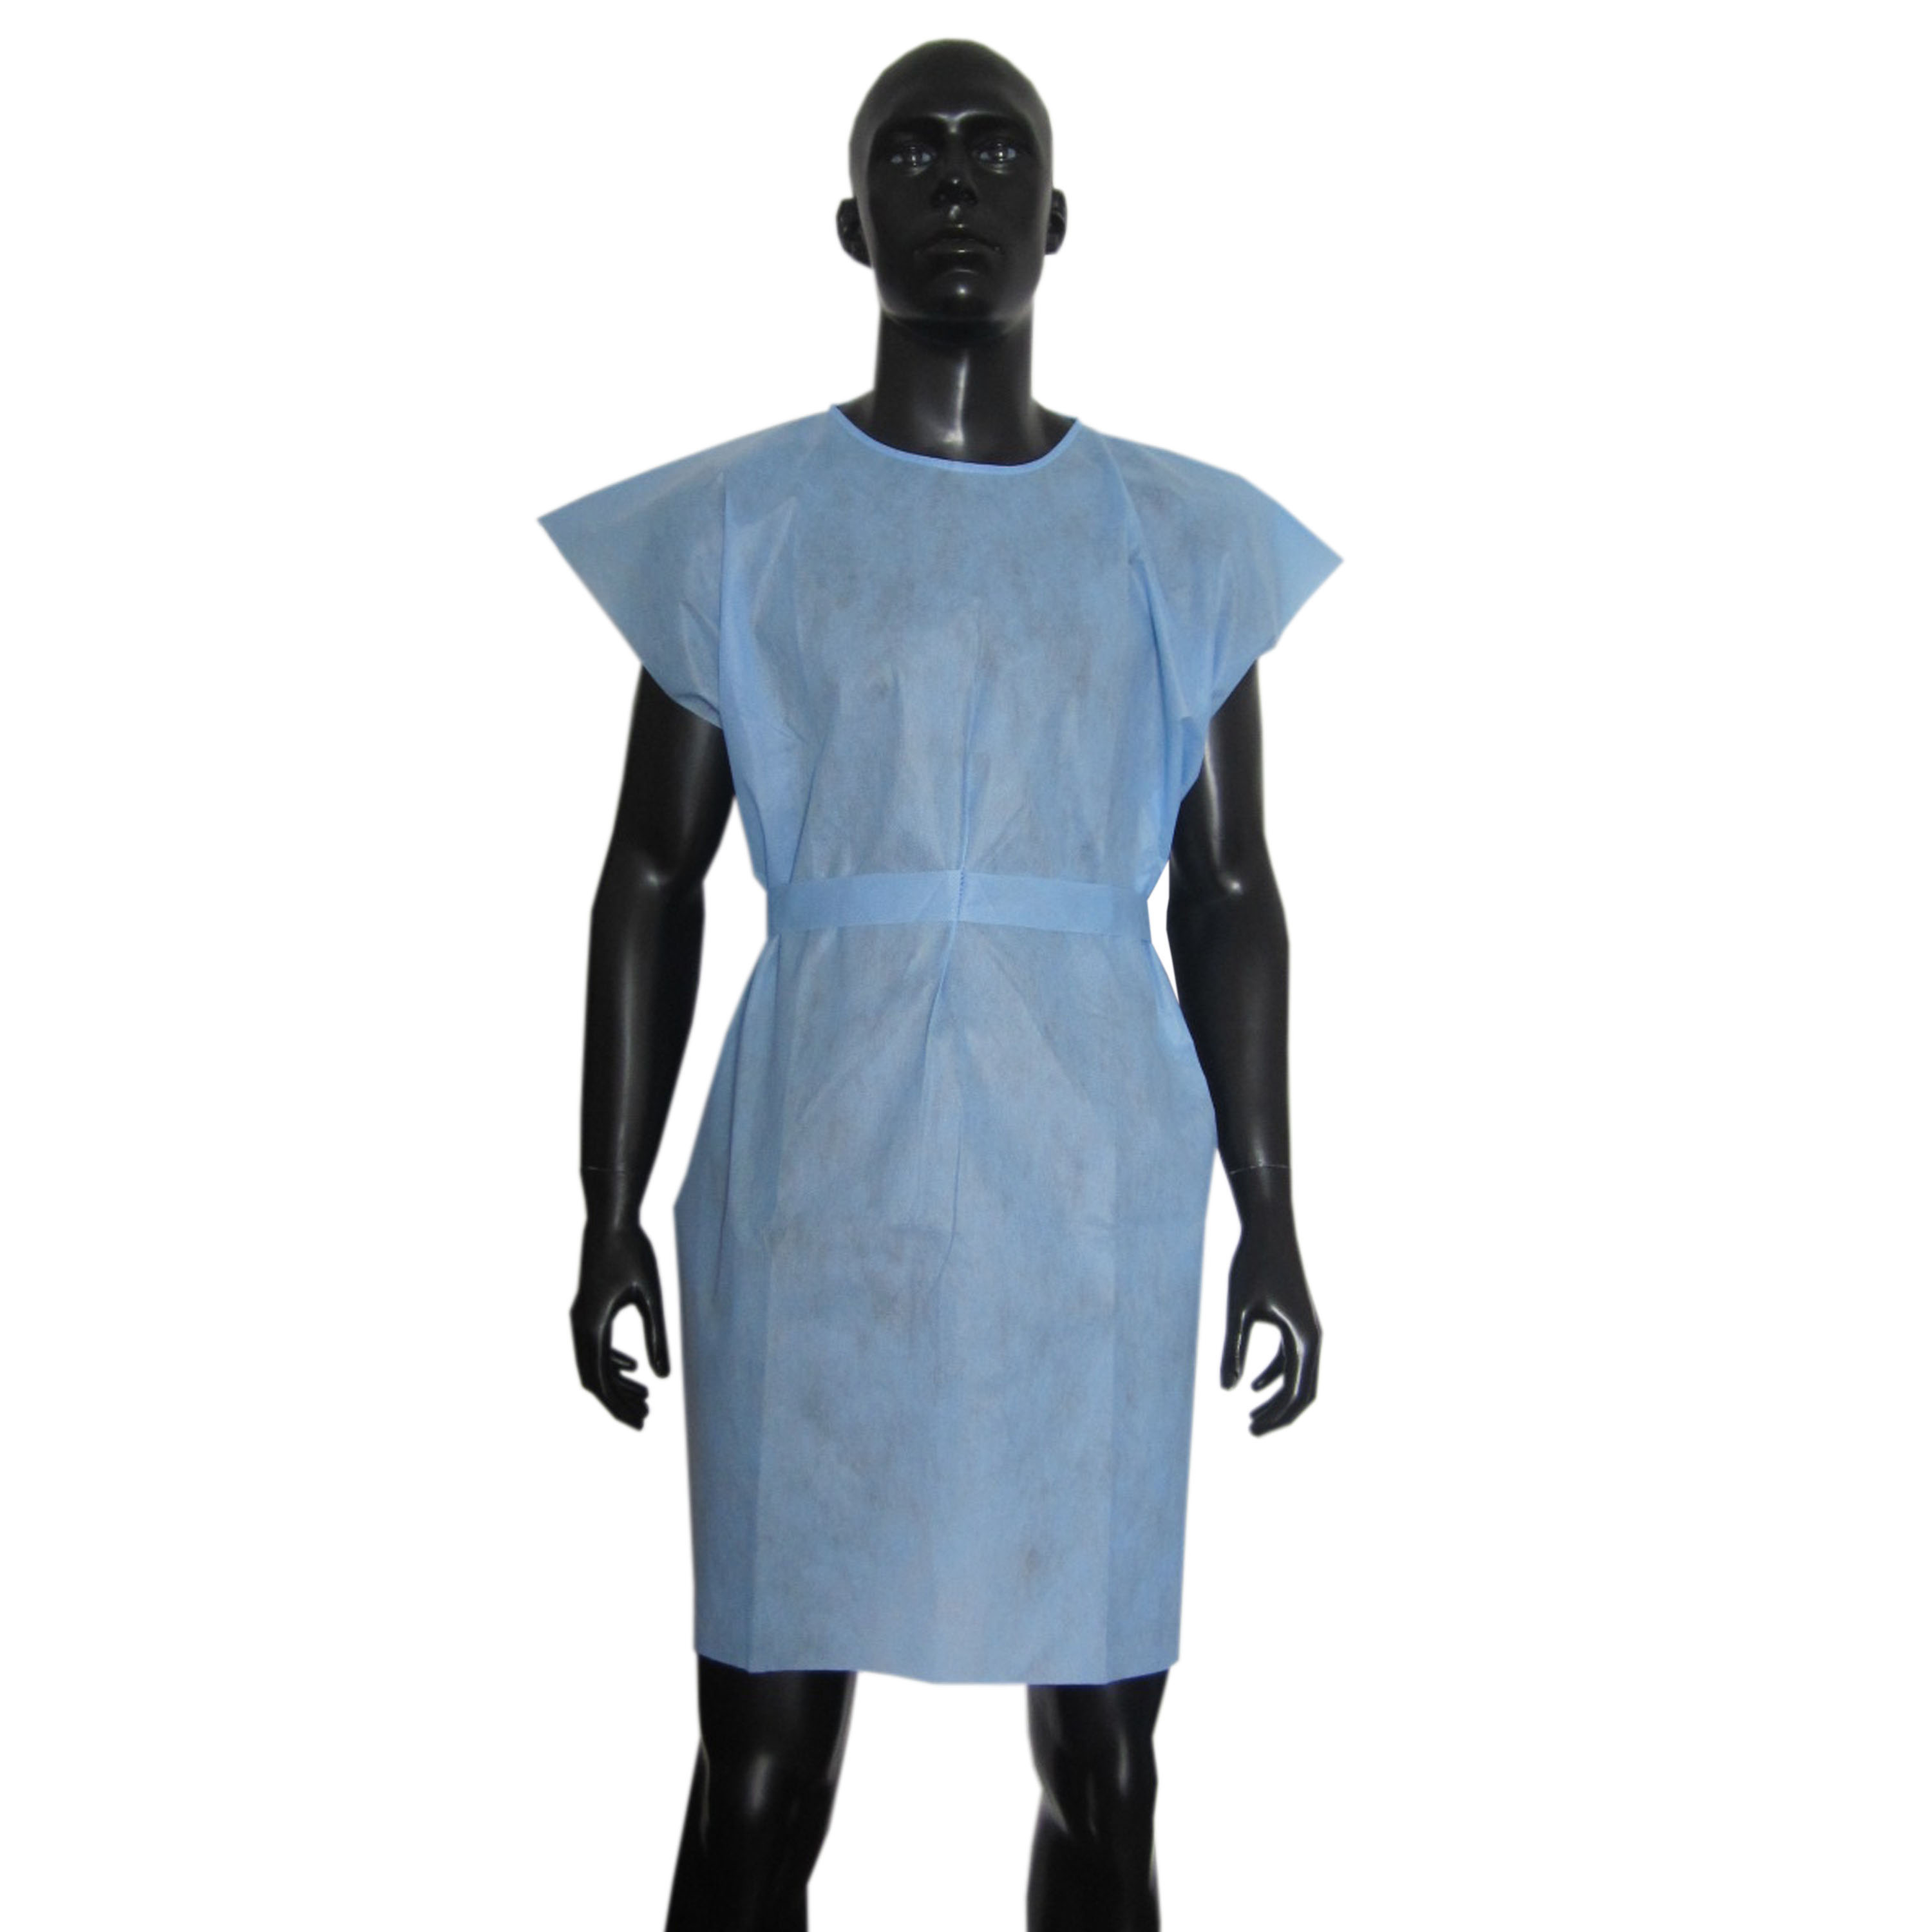 Adults Patient Gown with Short Sleeves 